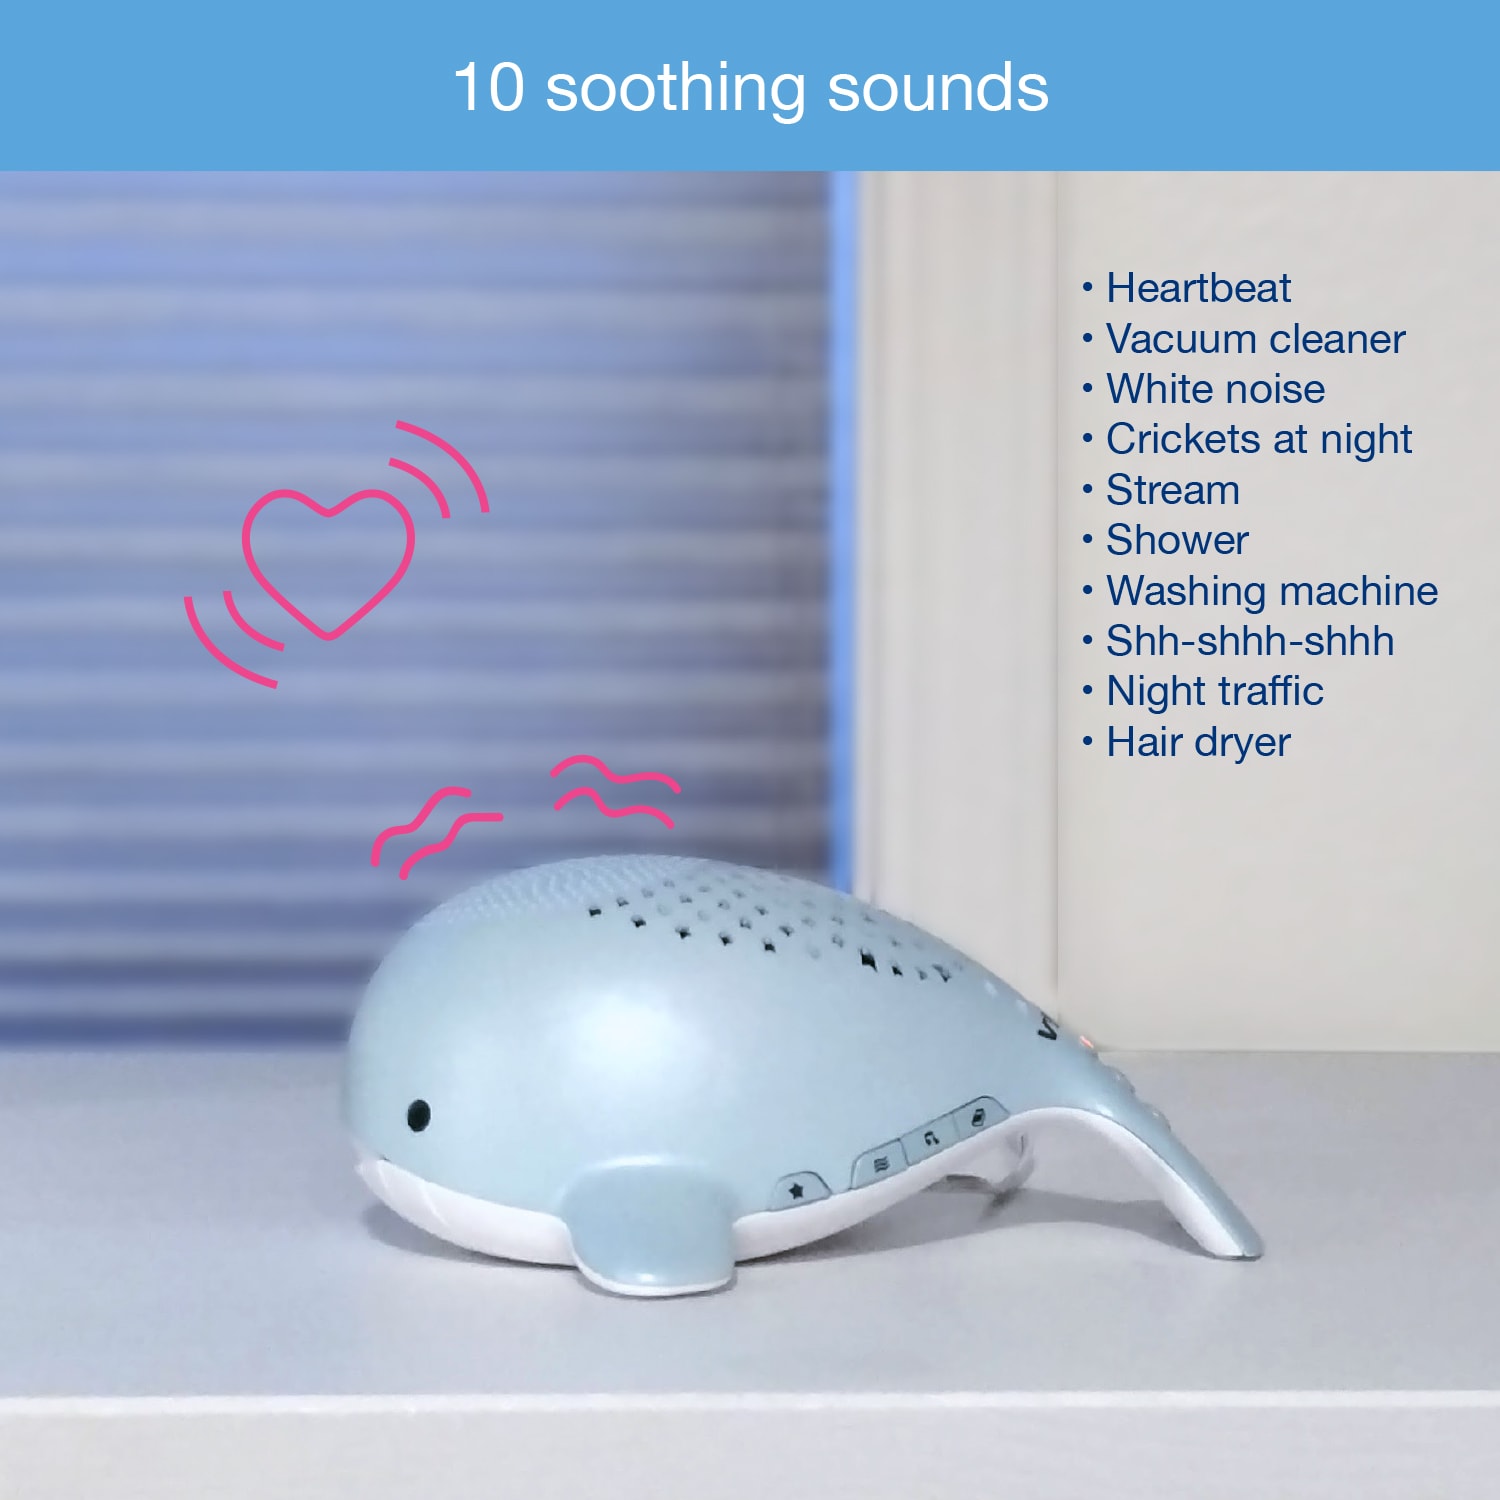 Wyatt the Whale® Storytelling Soother